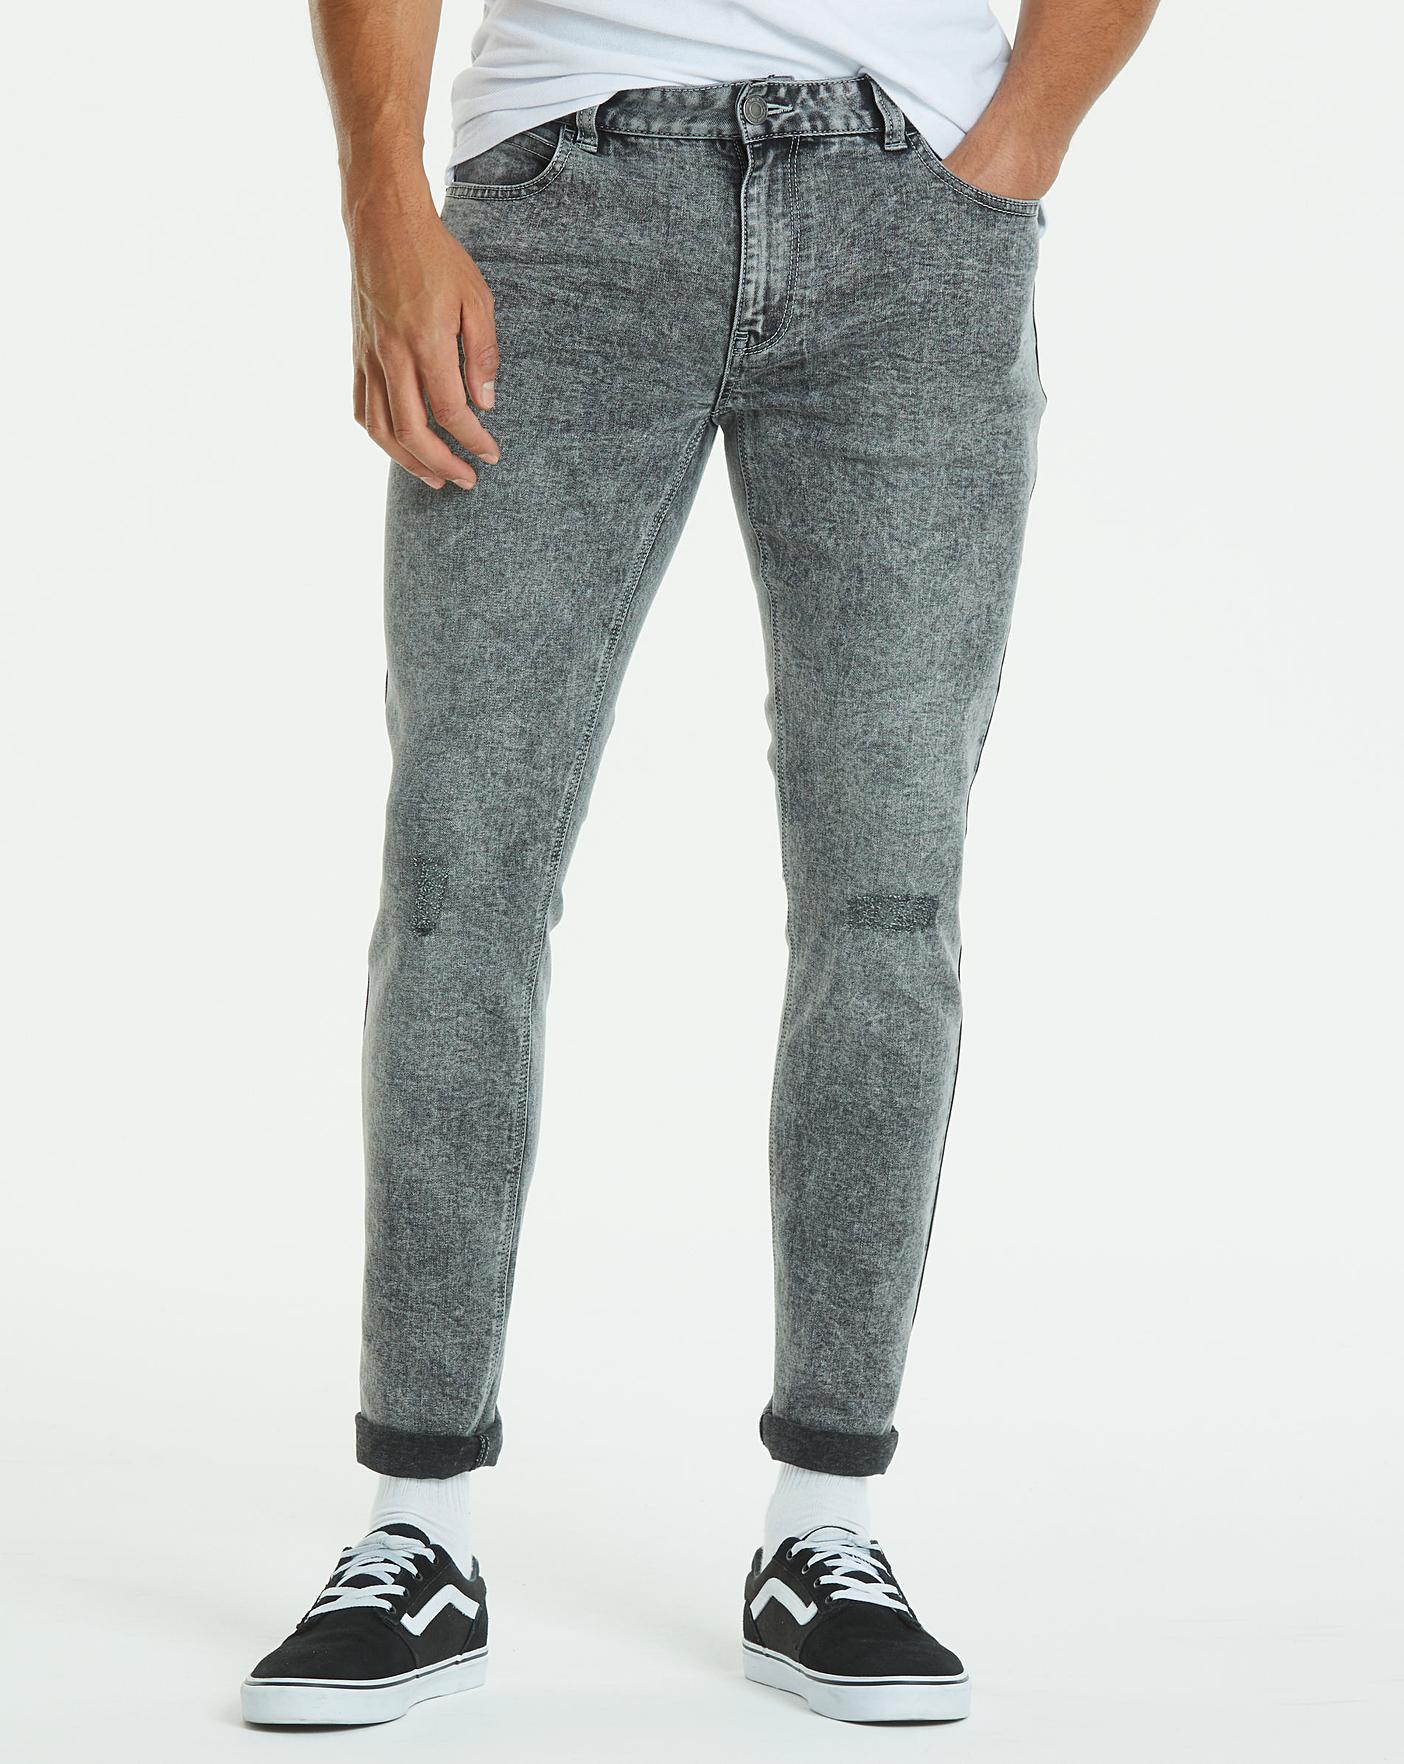 Skinny Washed Acid Grey Jeans 33 in 